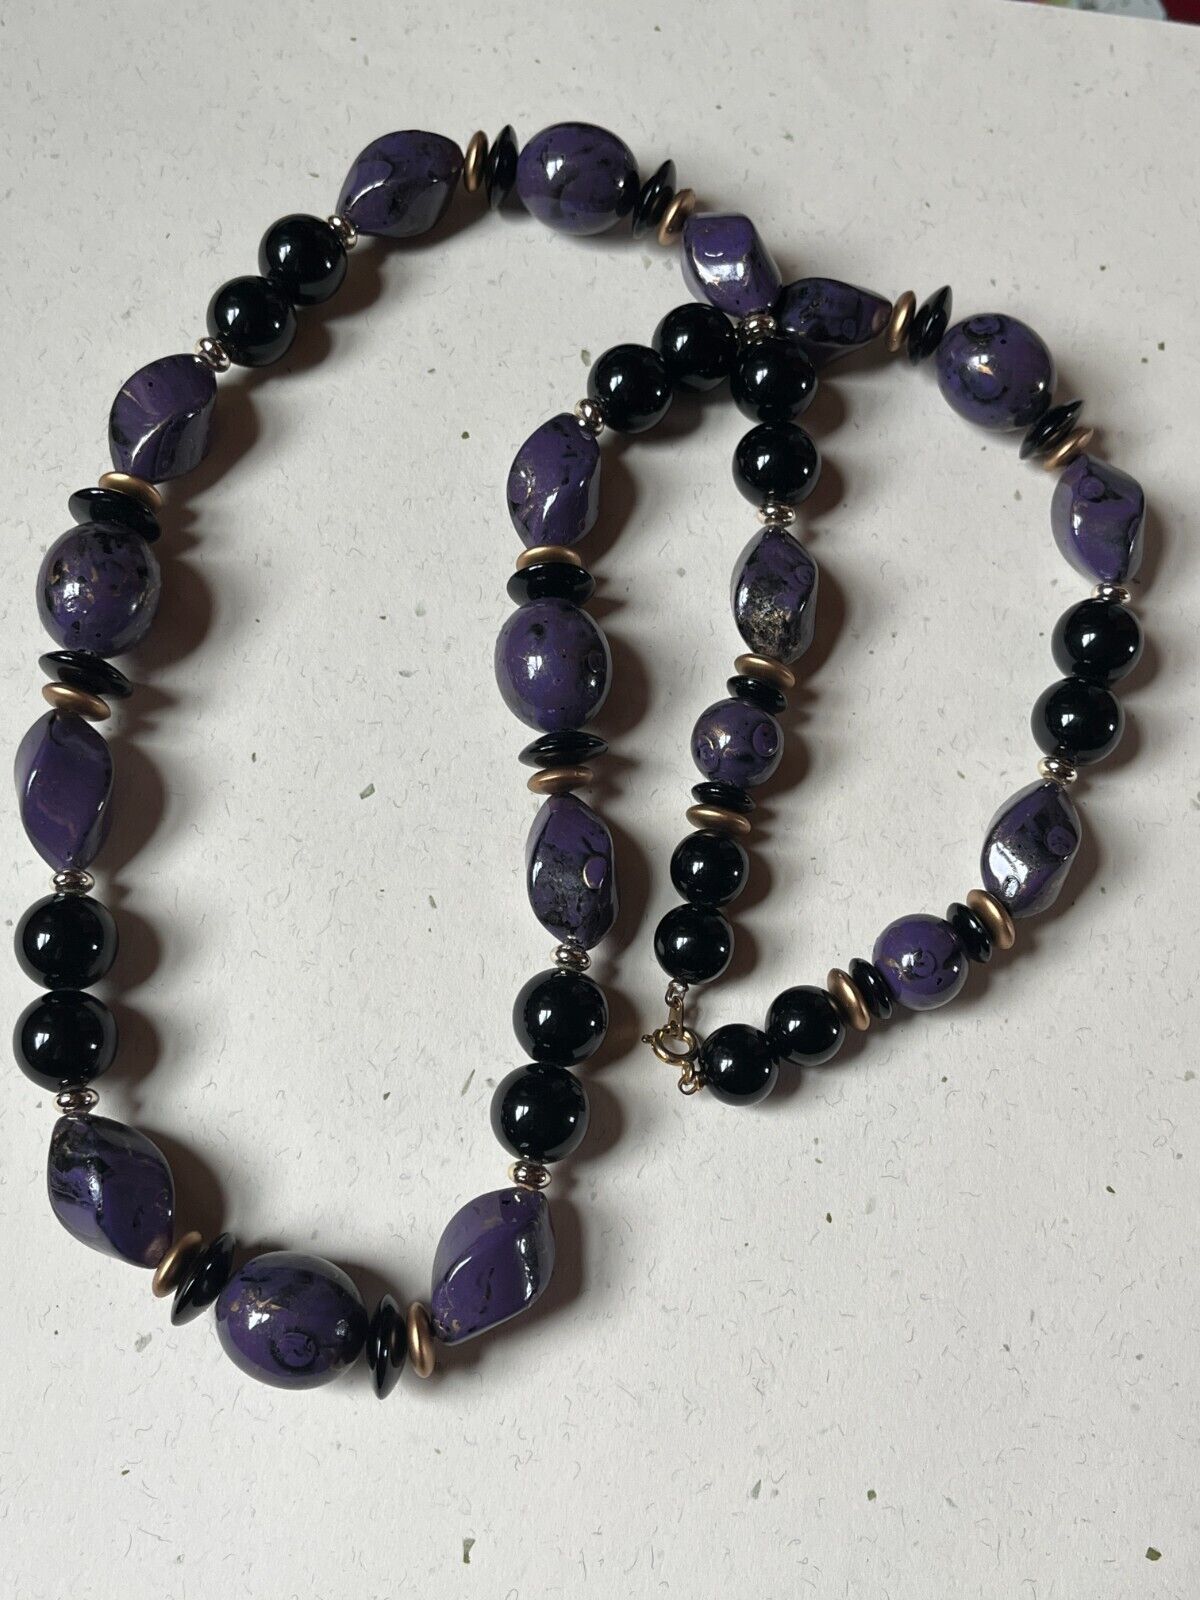 Primary image for Vintage Chunky Purple & Black w Goldtone Spacer Bead Necklace – 28 inches long x